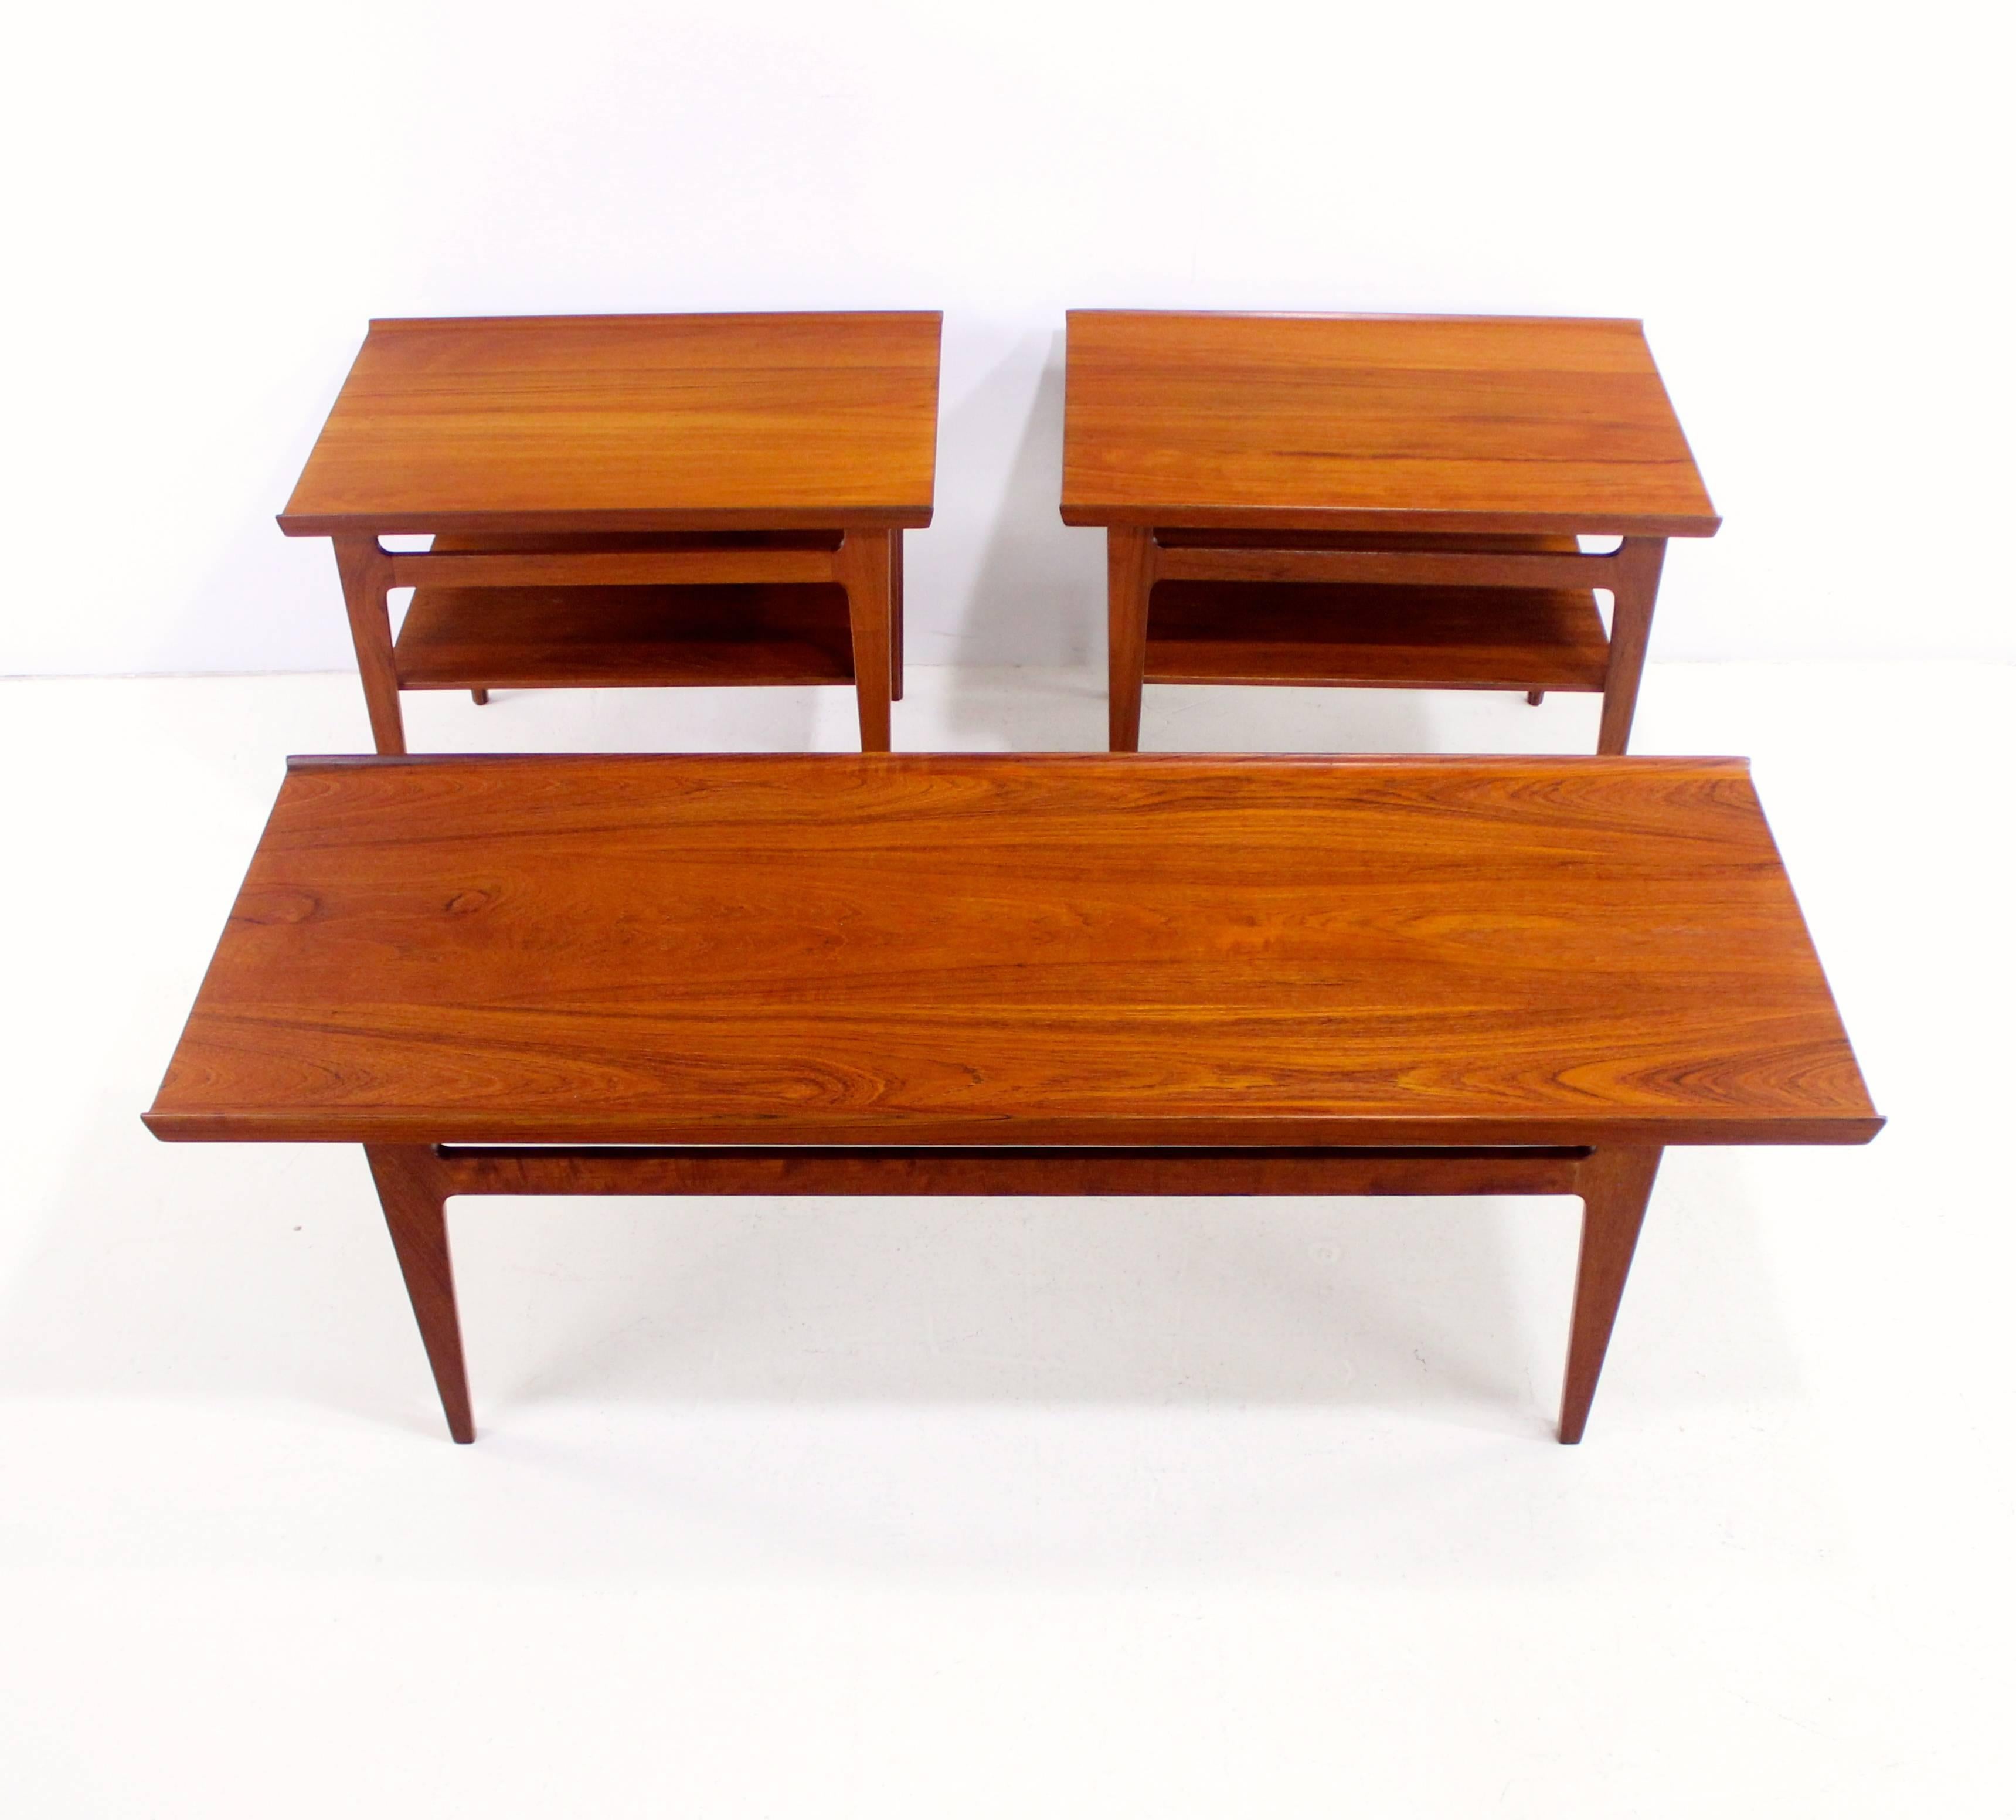 Danish modern three-piece table set designed by Finn Juhl.
France & Son, maker.
One solid teak coffee table with signature Juhl raised edges.
Two solid teak end tables with signature Juhl raised edges and lower shelf.
End tables measure: